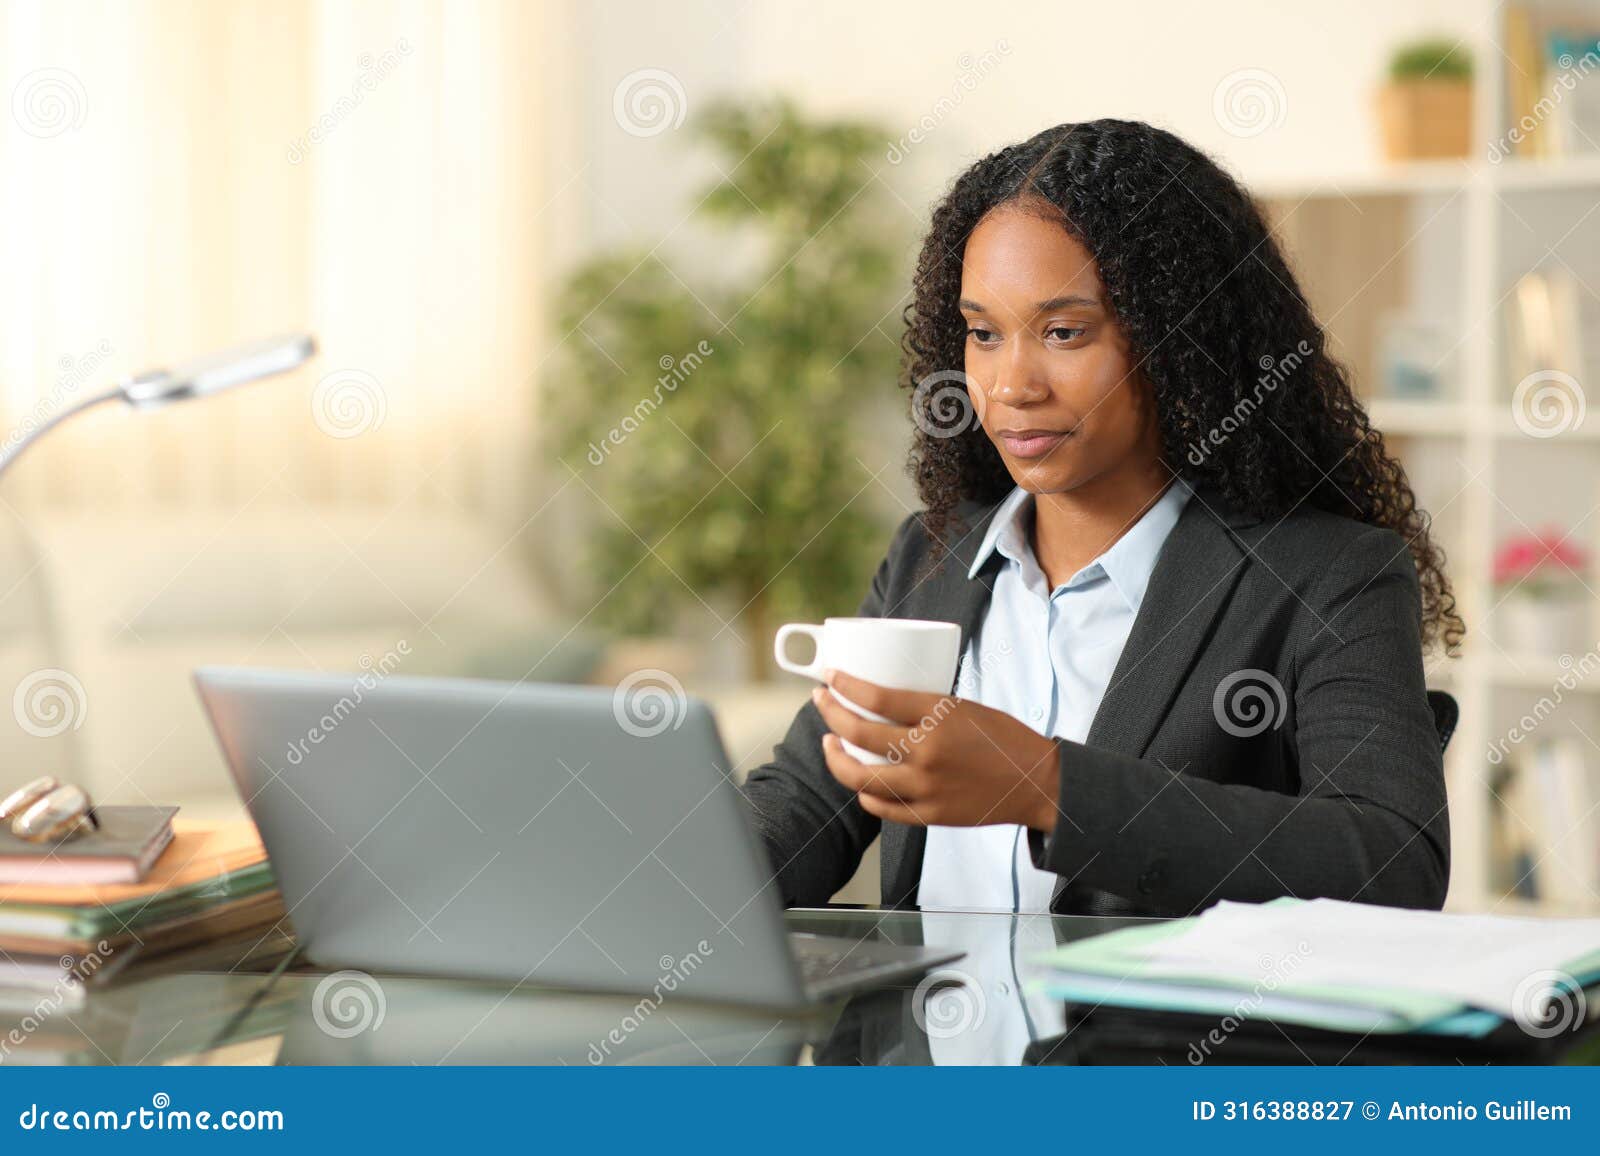 black tele worker drinking and working at home